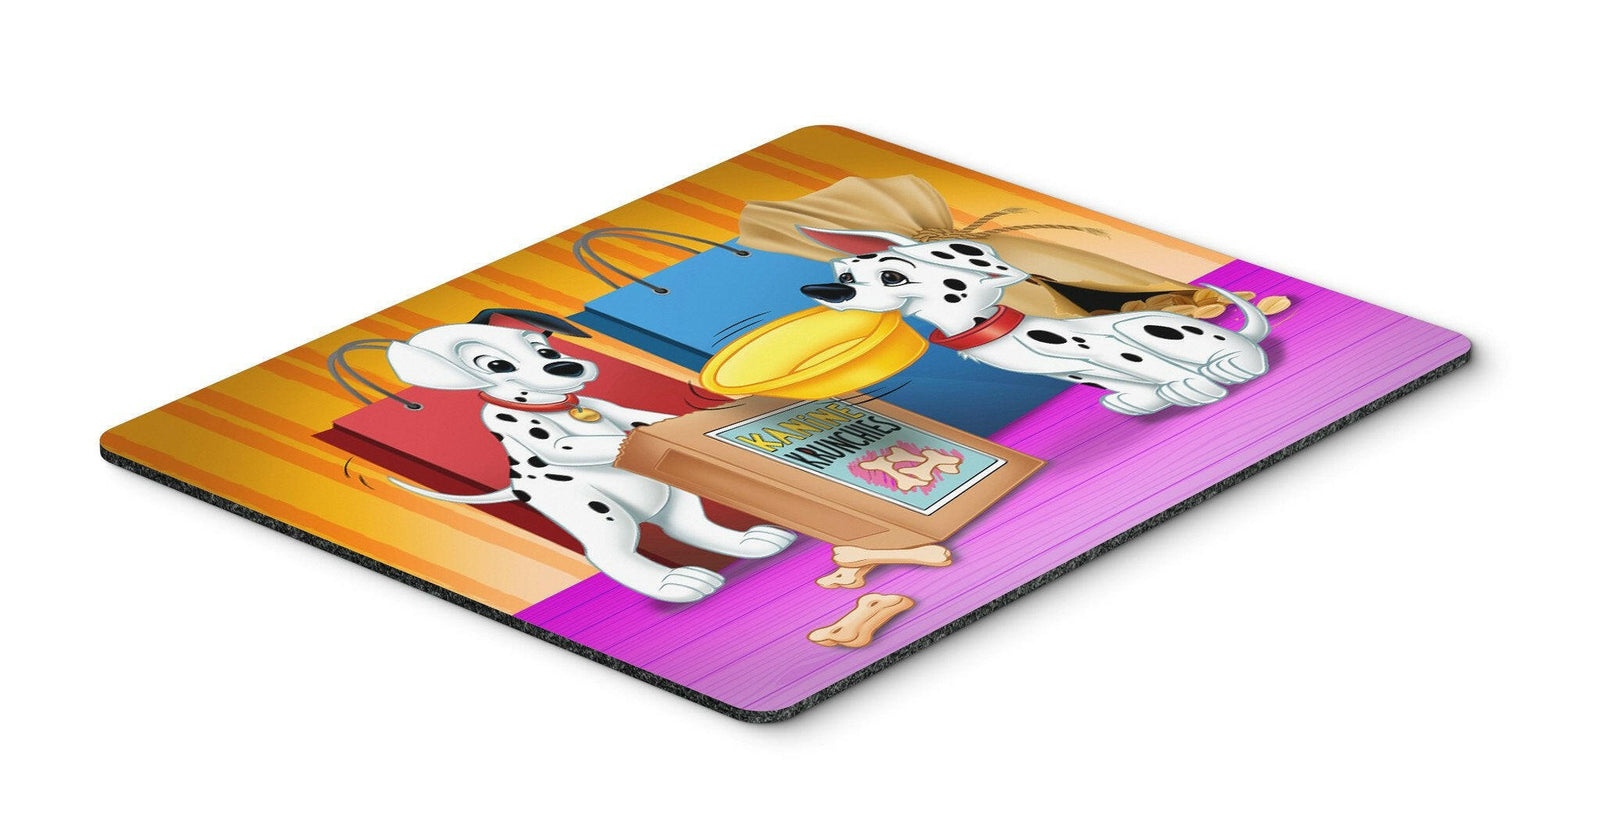 Dalmatians Snack Time Mouse Pad, Hot Pad or Trivet APH9063MP by Caroline's Treasures